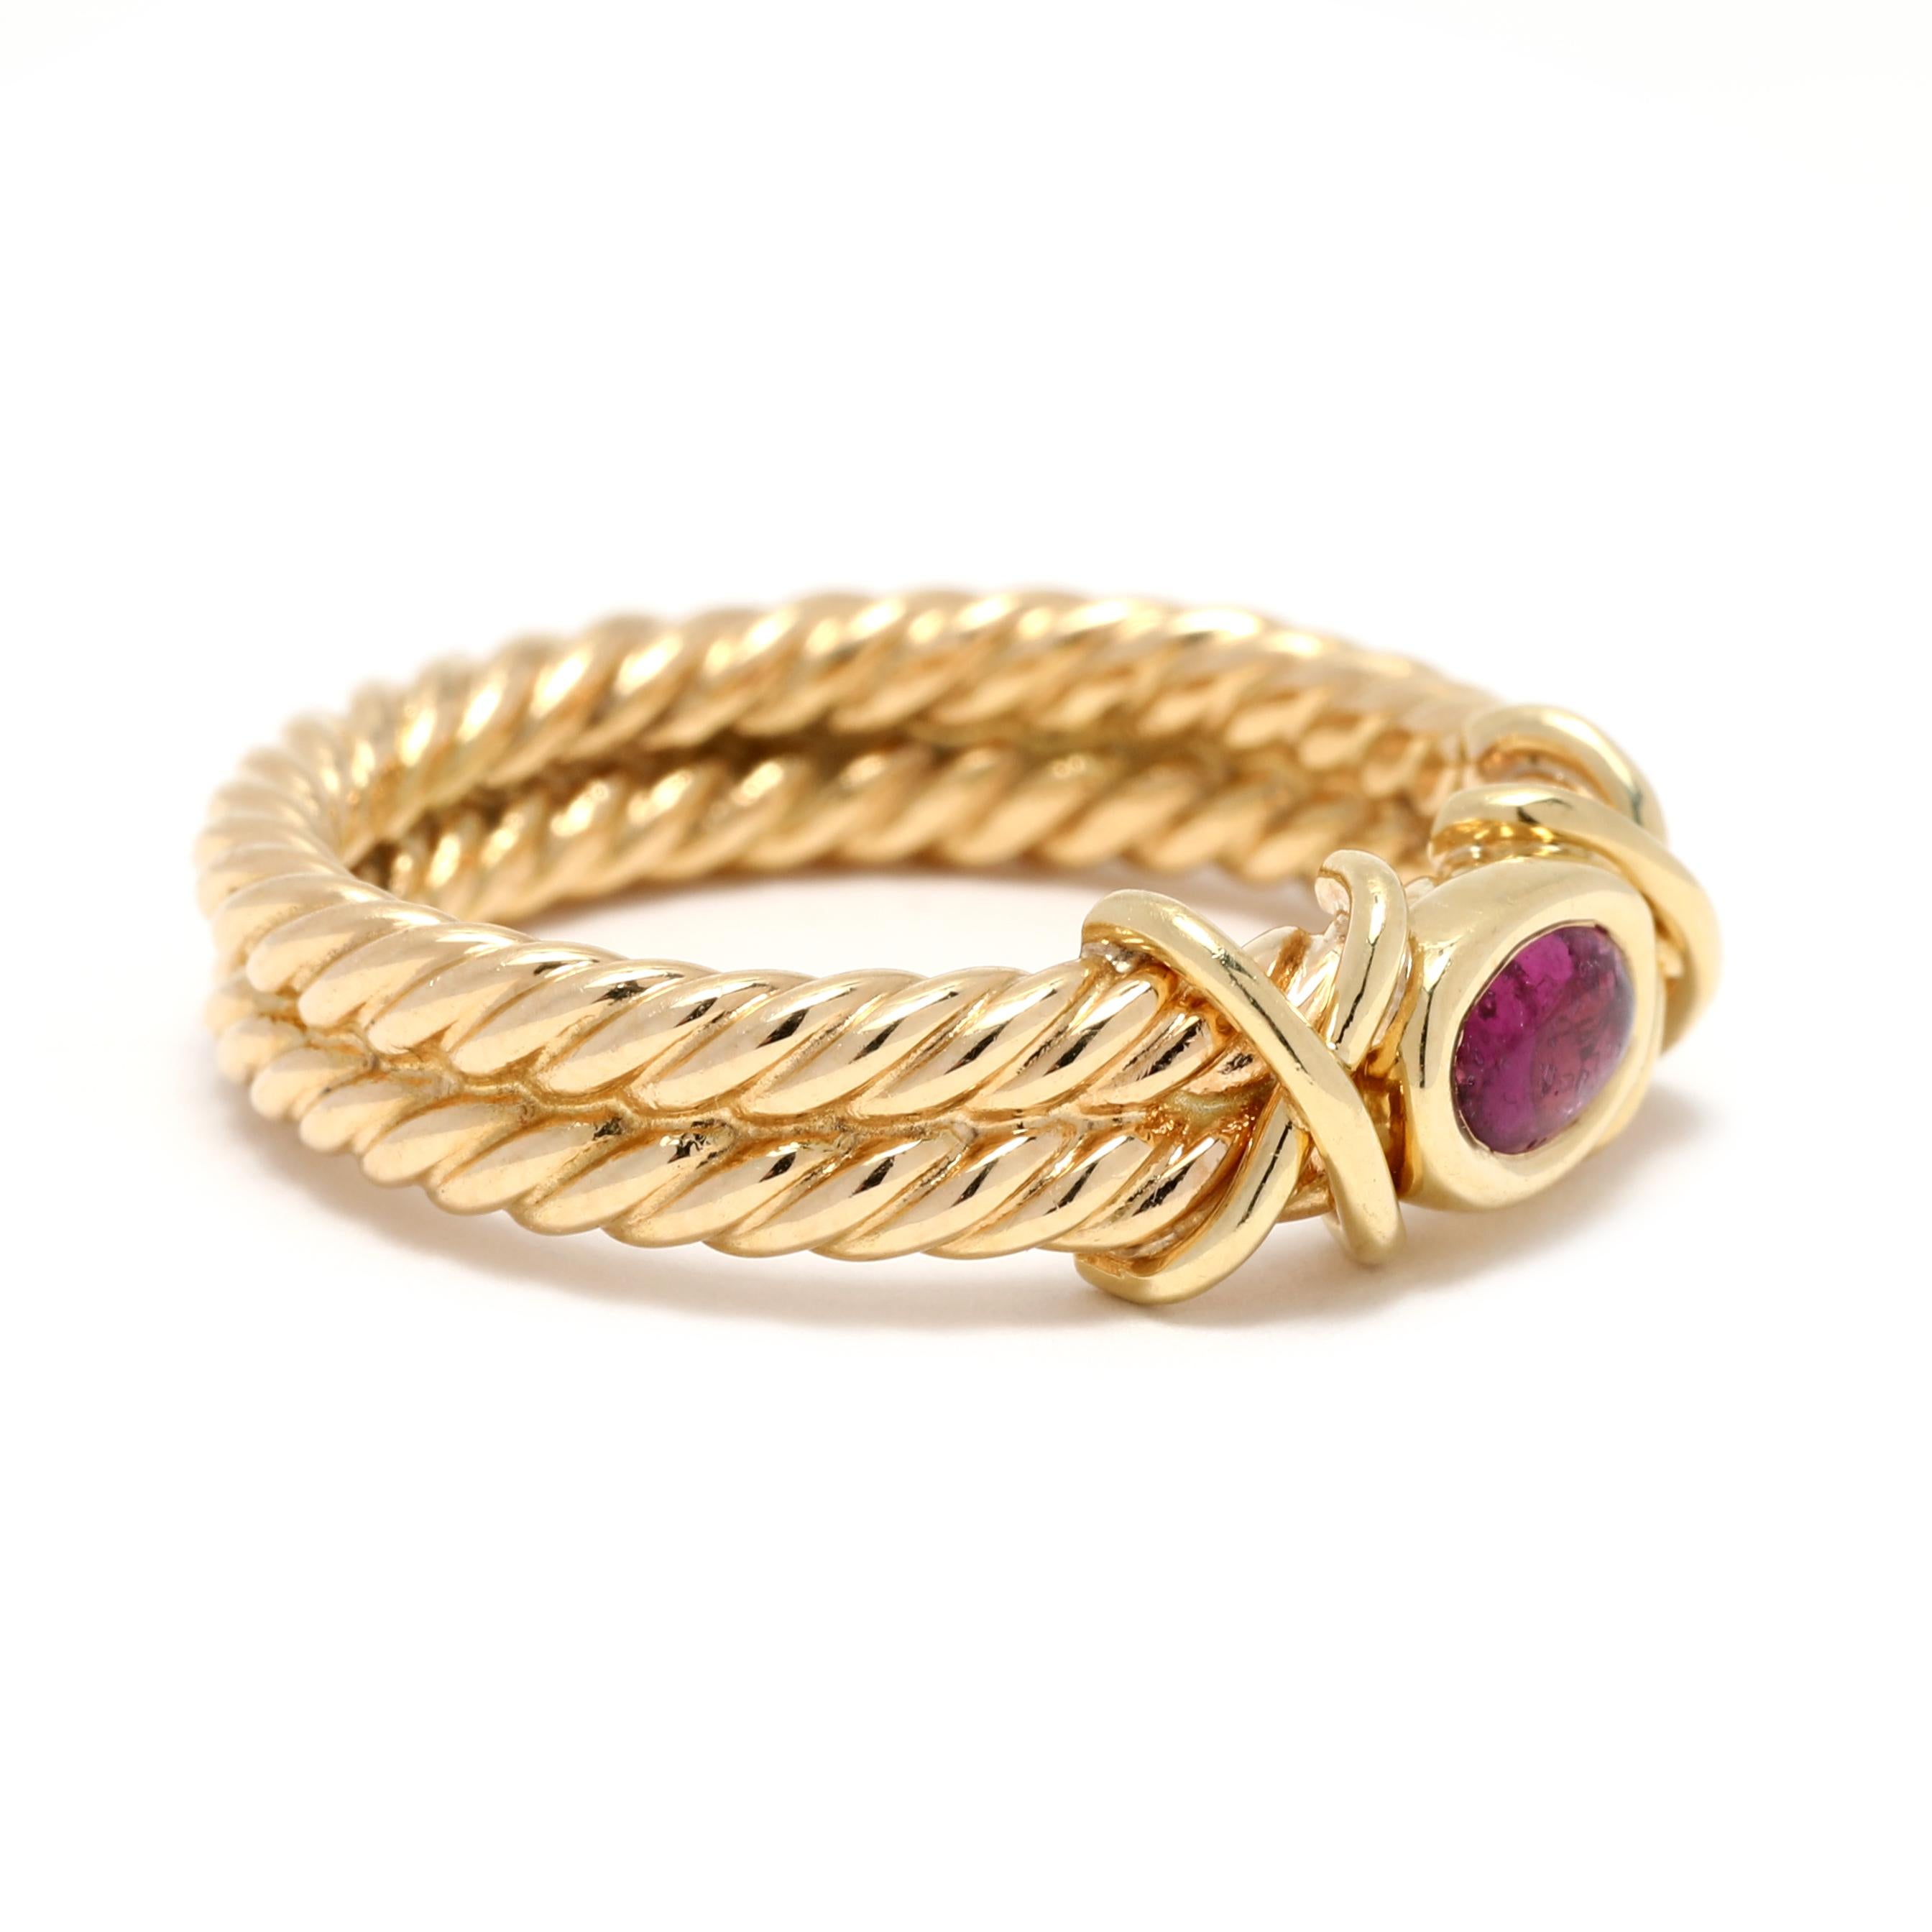 This stunning 0.45ctw cabochon ruby rope band ring is made of 18K yellow gold. This beautiful double X rope band ring has a ring size of 6.25 and is perfect for any occasion. The deep red of the cabochon rubies and the bright yellow gold make this